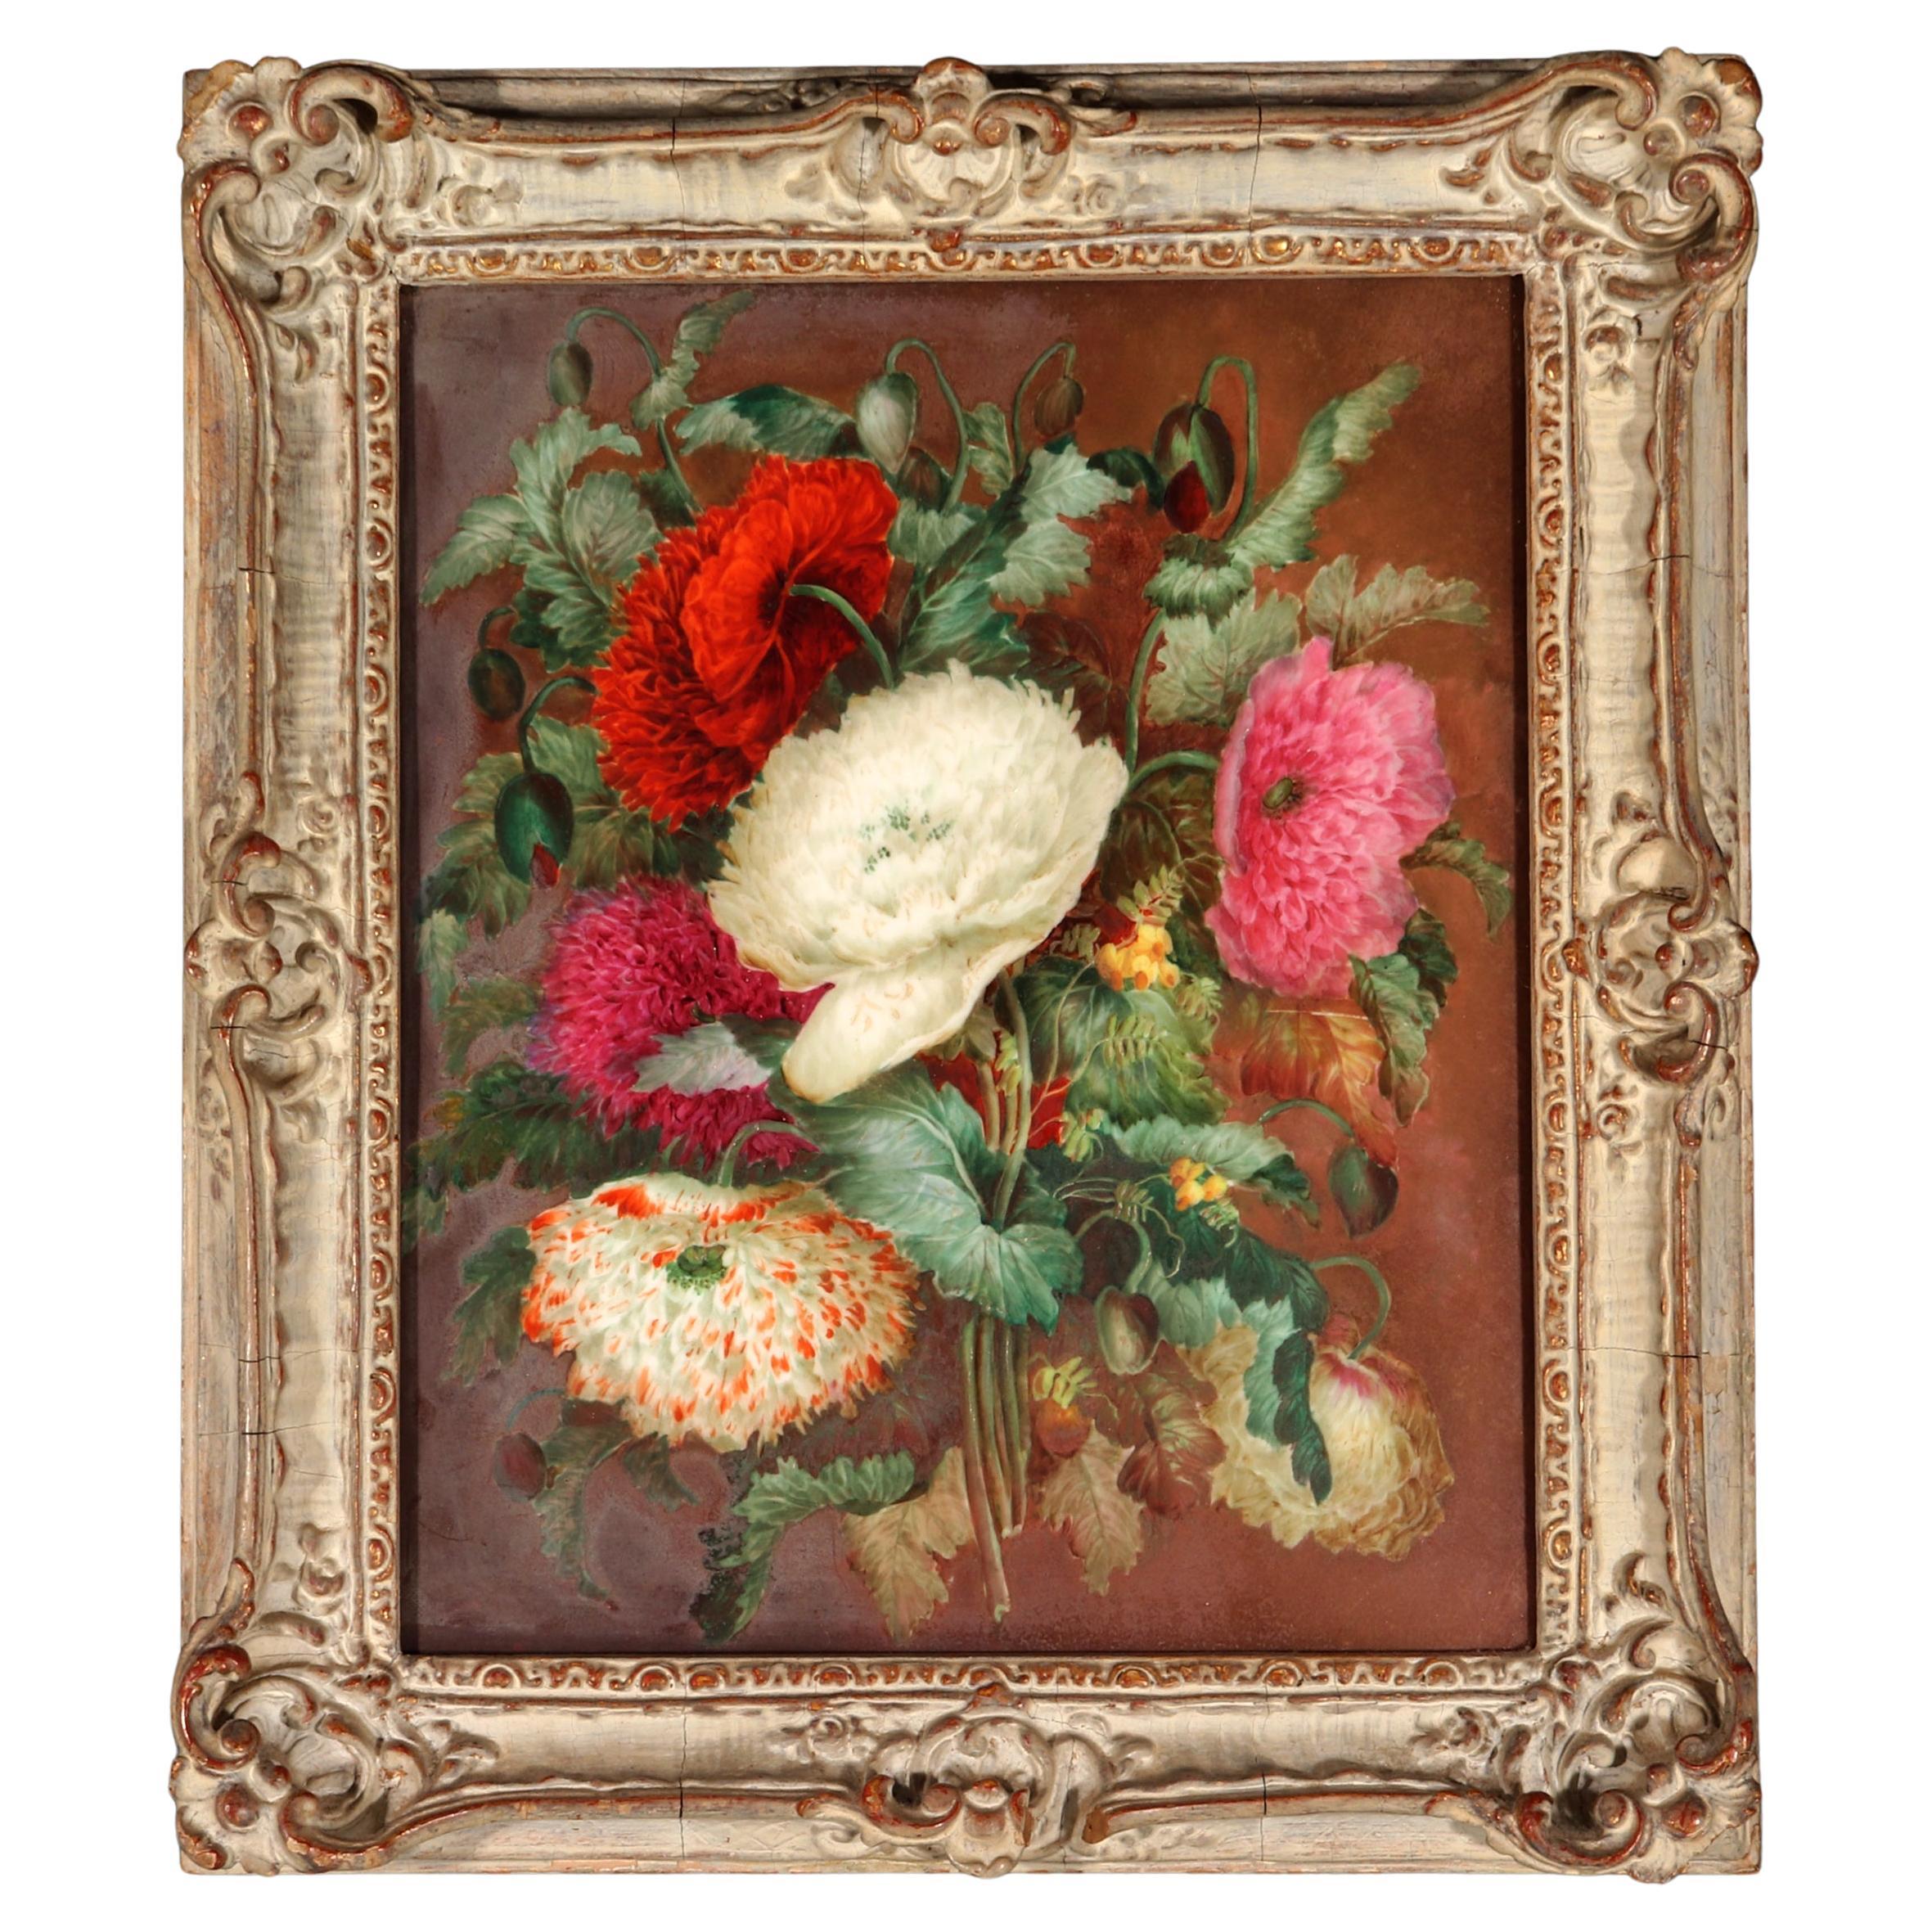 English Porcelain Botanical Plaque, Attributed to Derby